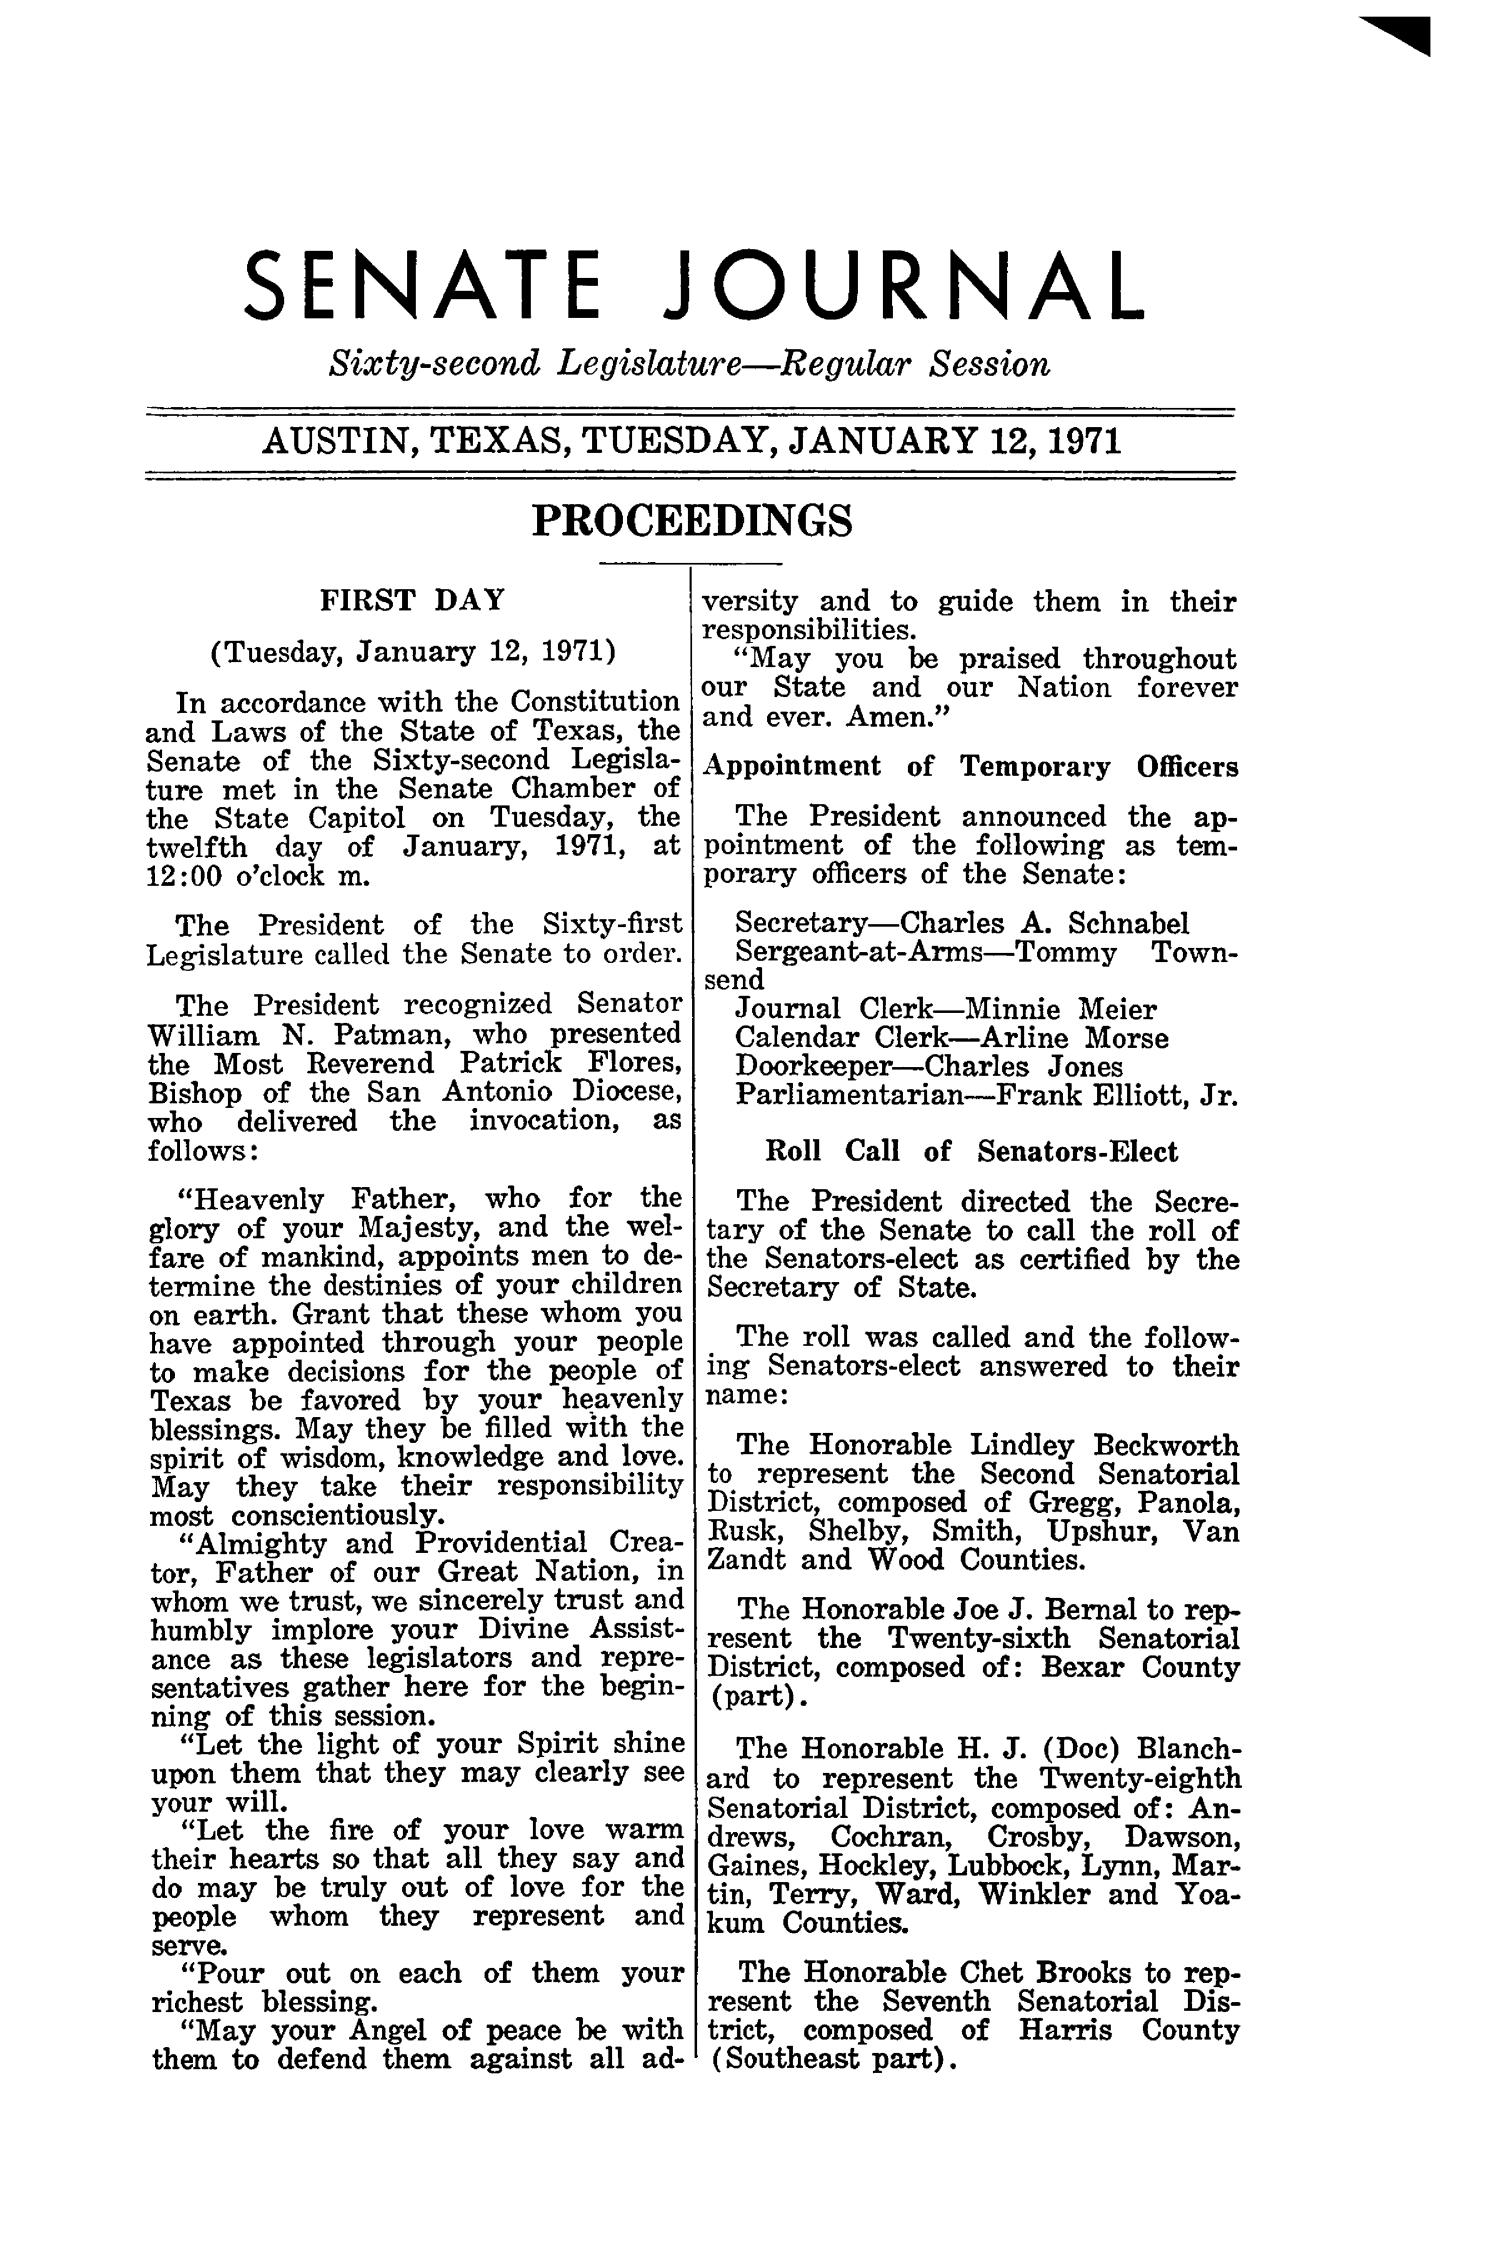 Journal of the Senate of the State of Texas, Regular Session of the Sixty-Second Legislature, Volume 1
                                                
                                                    7
                                                